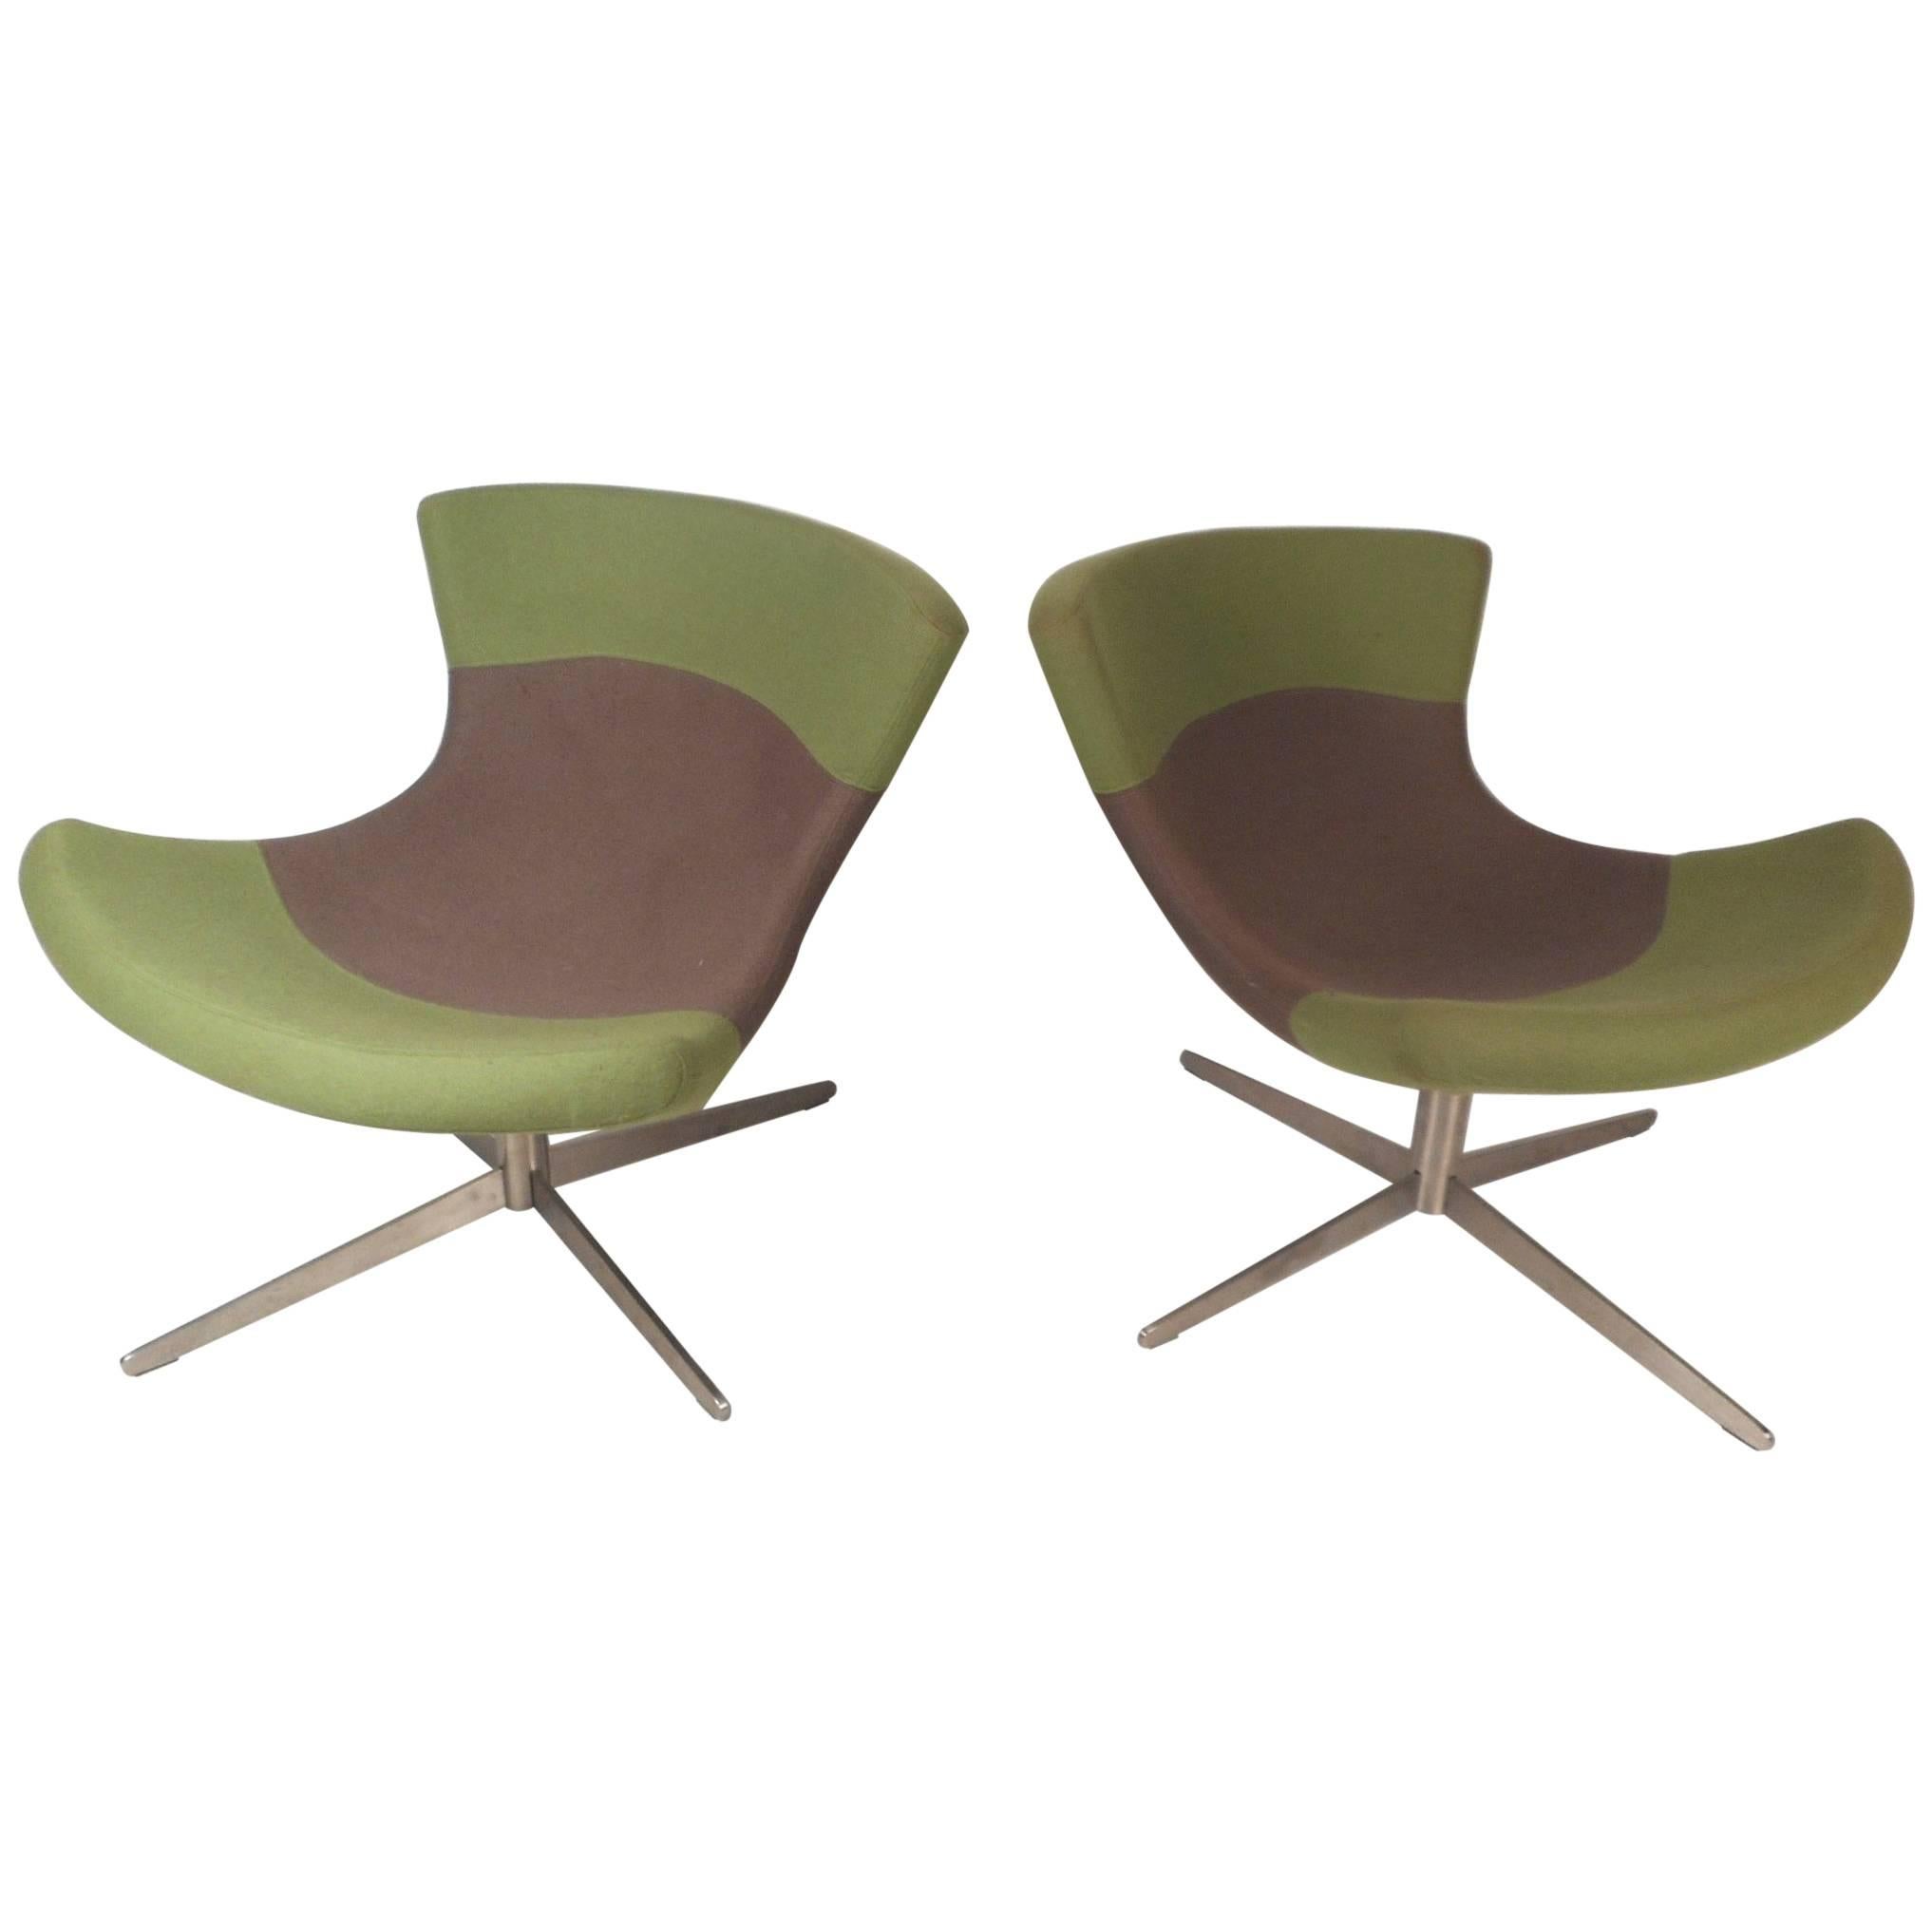 Mid-Century Modern Lounge Chairs in the Style of Arne Jacobsen